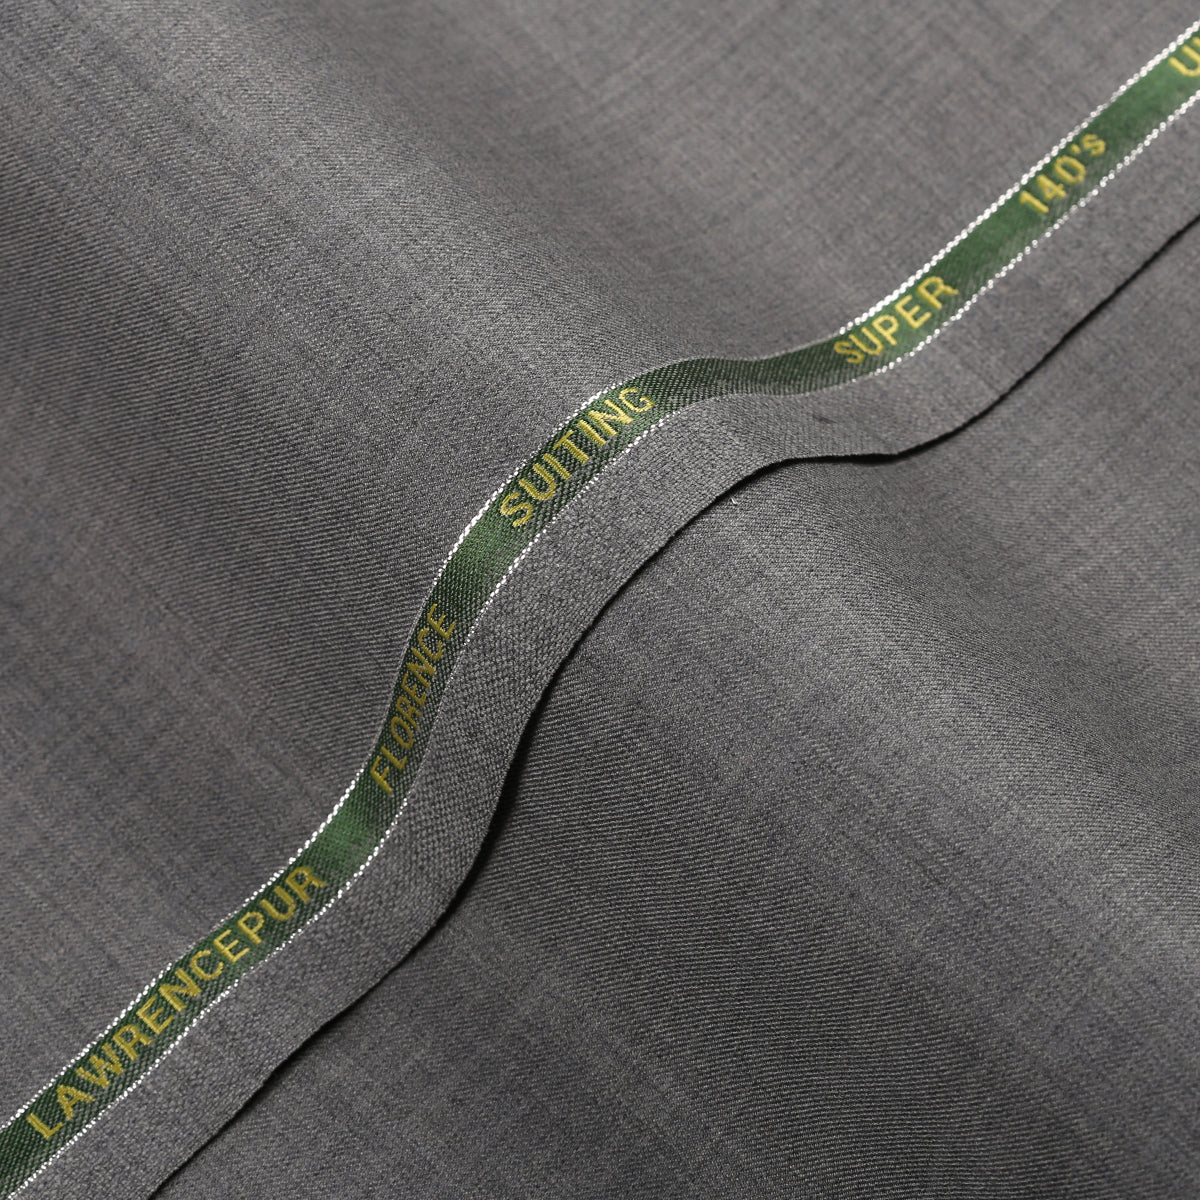 Plain-Silver Grey, S 140s Pure Wool, Florence Suiting Fabric